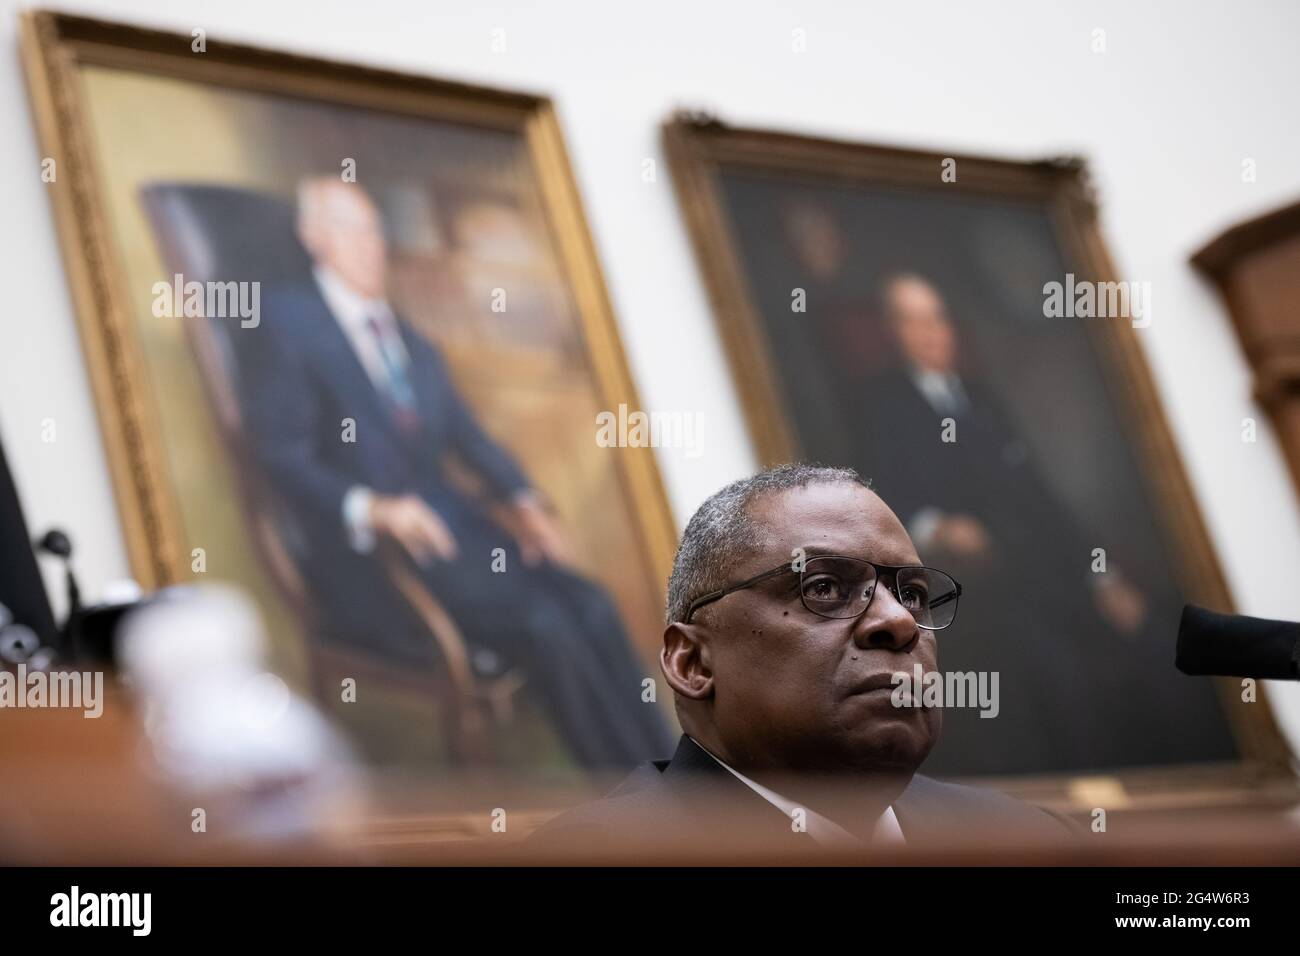 Washington, USA. 23rd June, 2021. Secretary of Defense Lloyd Austin testifies during a House Armed Services Committee hearing, at the U.S. Capitol, in Washington, DC, on Wednesday, June 23, 2021. Last night Senate Republicans filibustered a voting rights bill as bipartisan negotiations over infrastructure legislation grind on with little apparent progress building a package to beat the 60-vote filibuster threshold. (Graeme Sloan/Sipa USA) Credit: Sipa USA/Alamy Live News Stock Photo